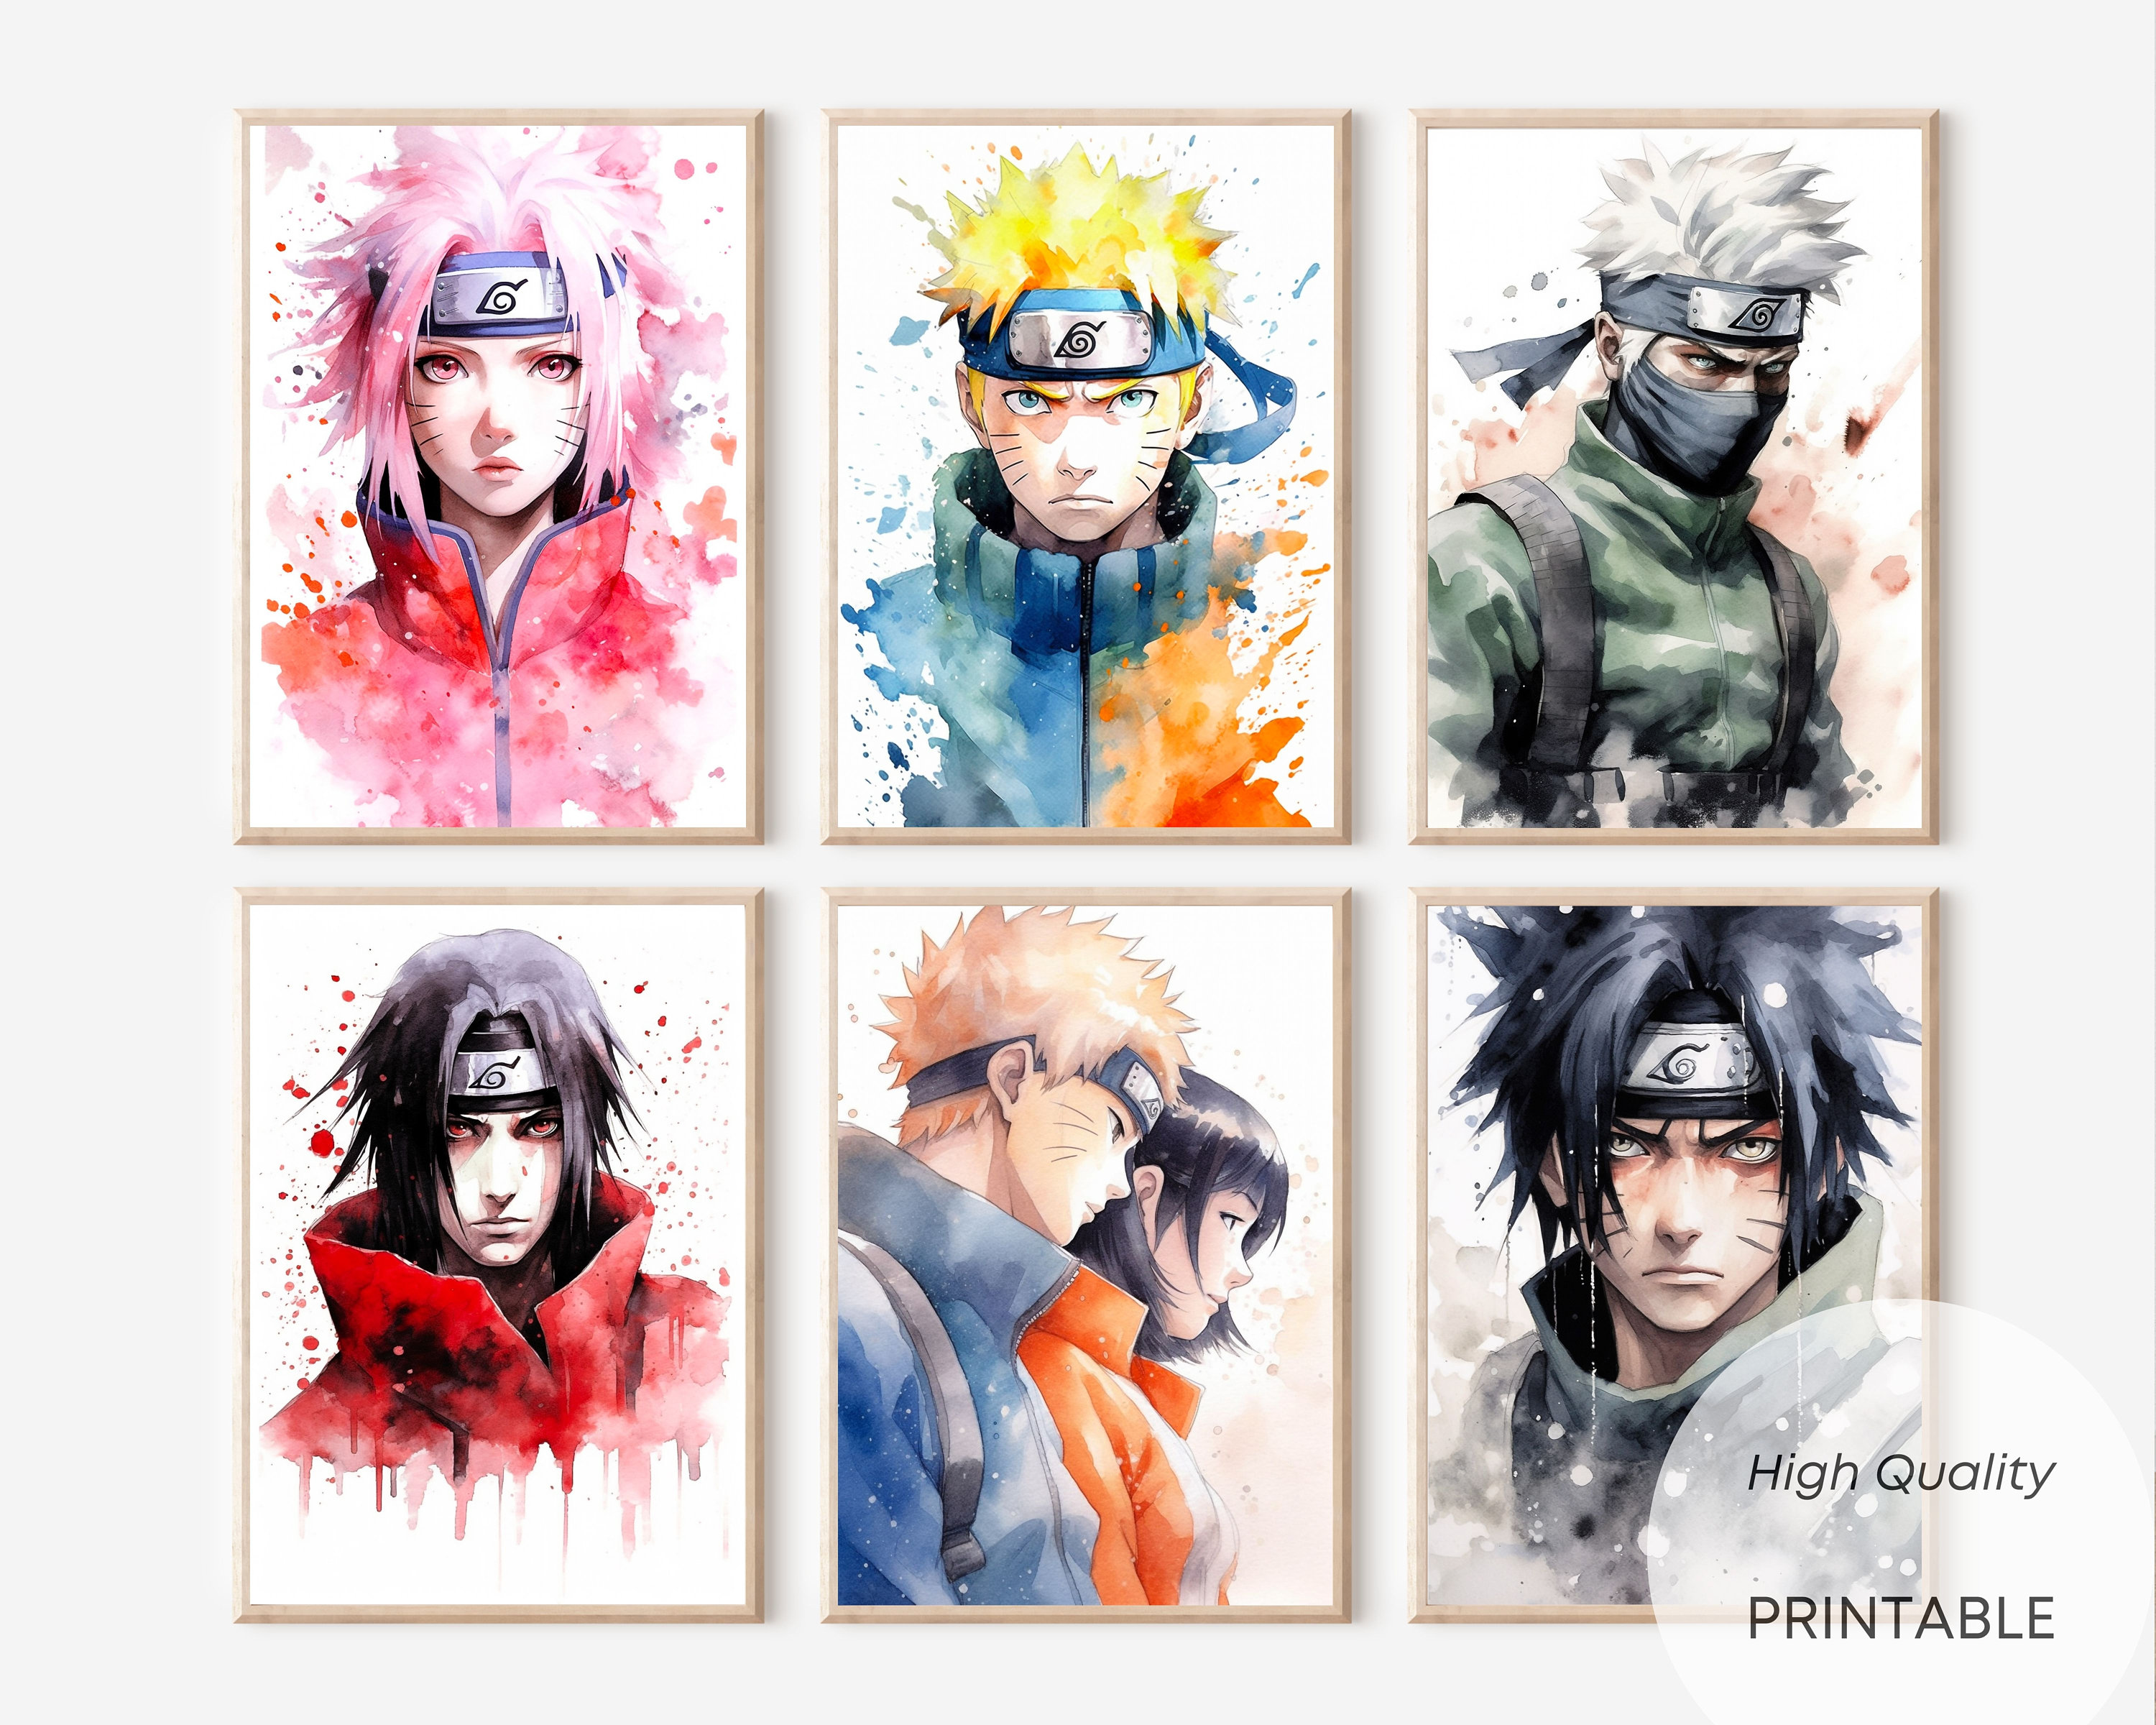  Naruto Characters Poster (24x36): Posters & Prints